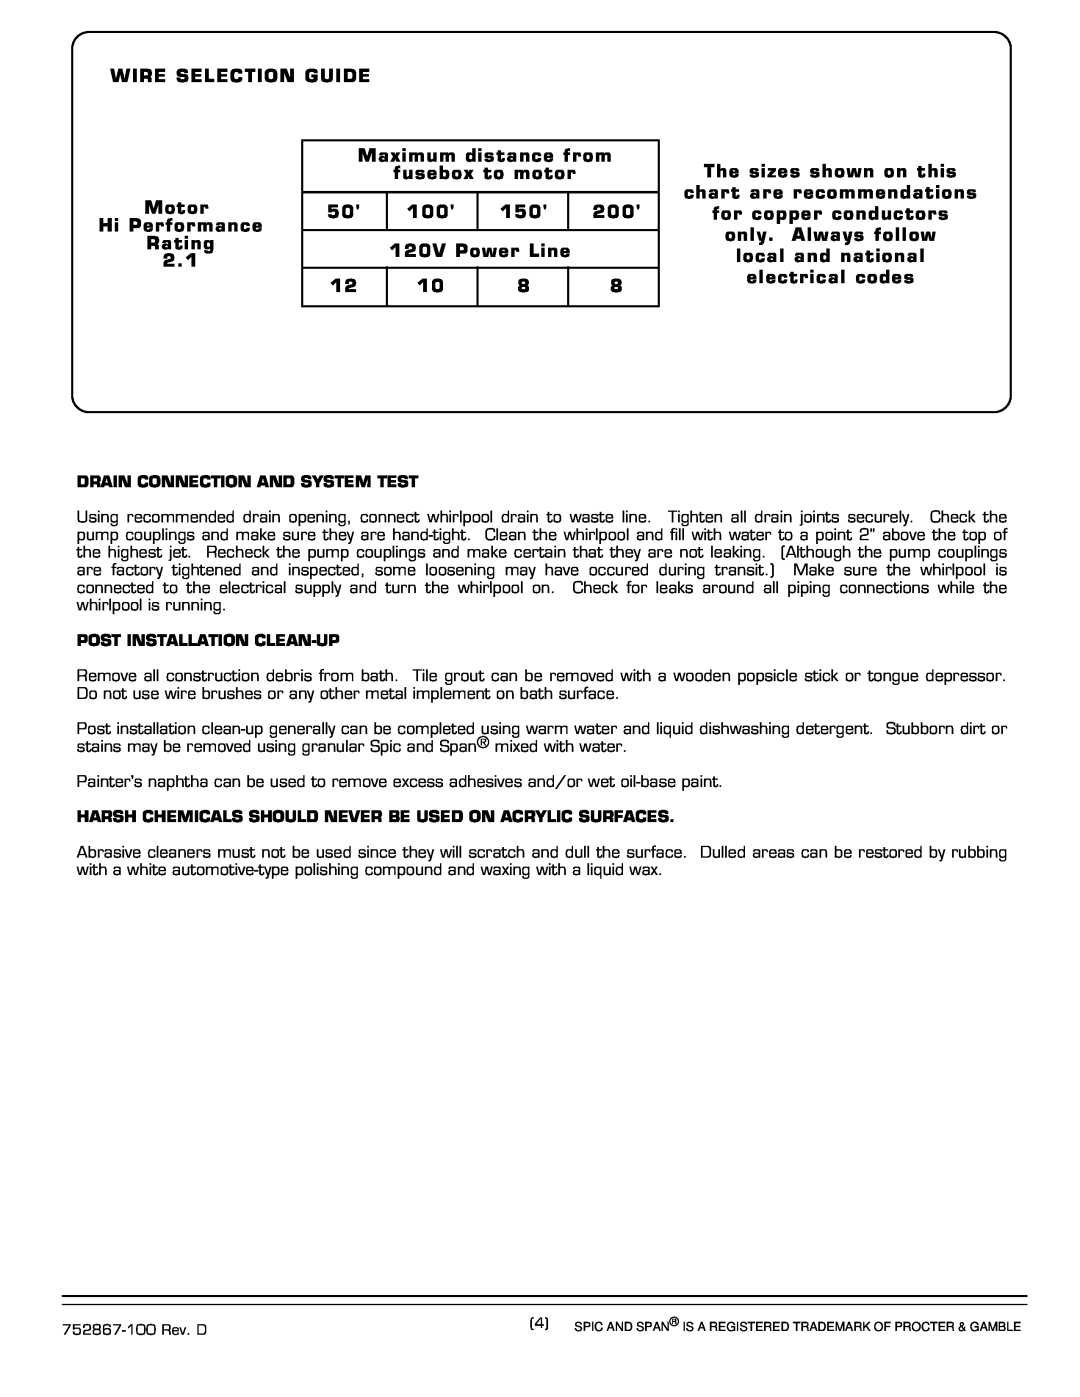 American Standard 2901E SERIES installation instructions Wire Selection Guide 